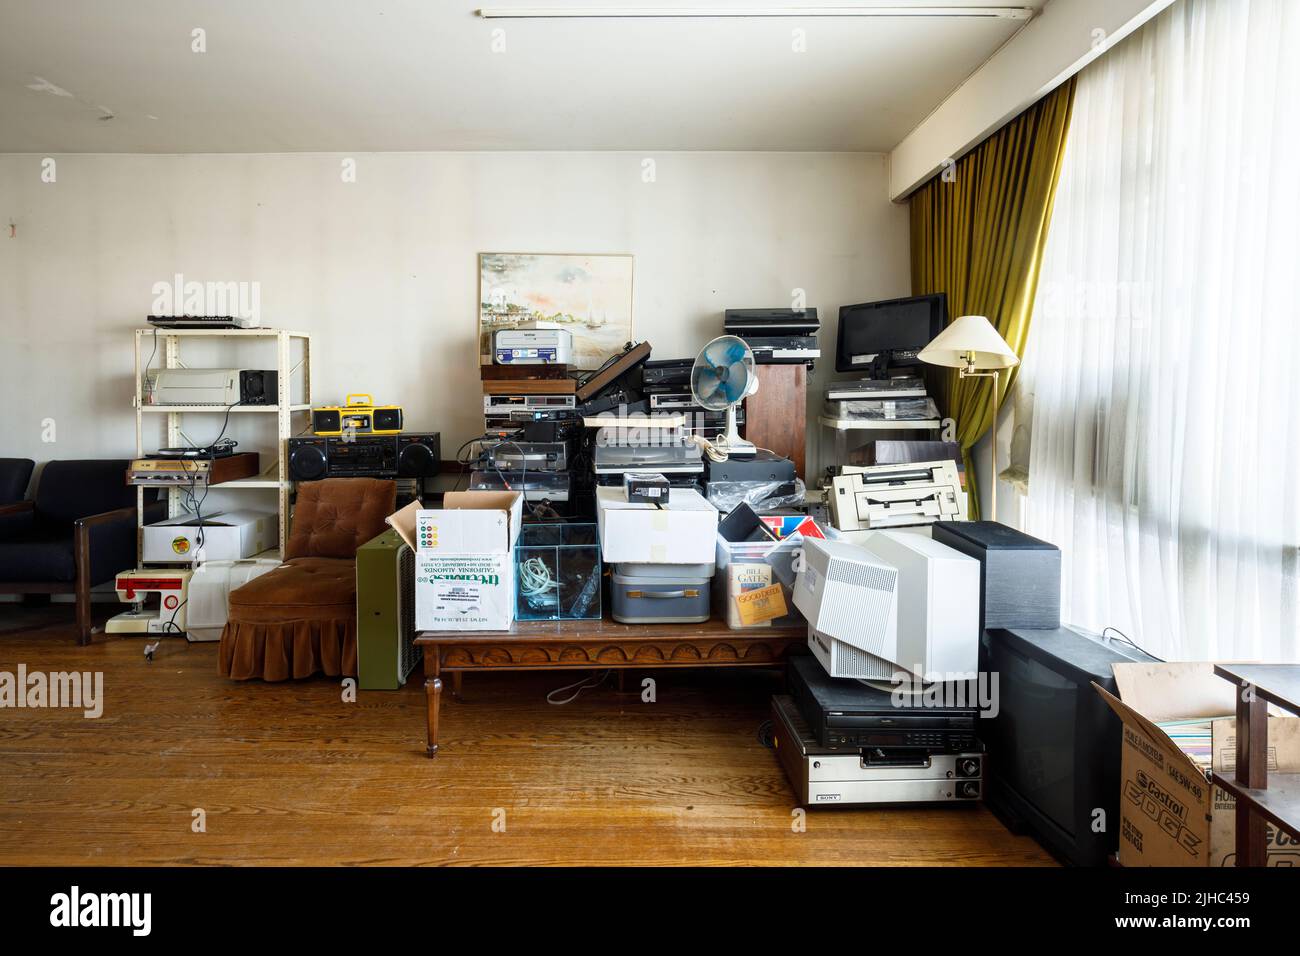 A cluttered mess of old electronics in a living room. Stock Photo